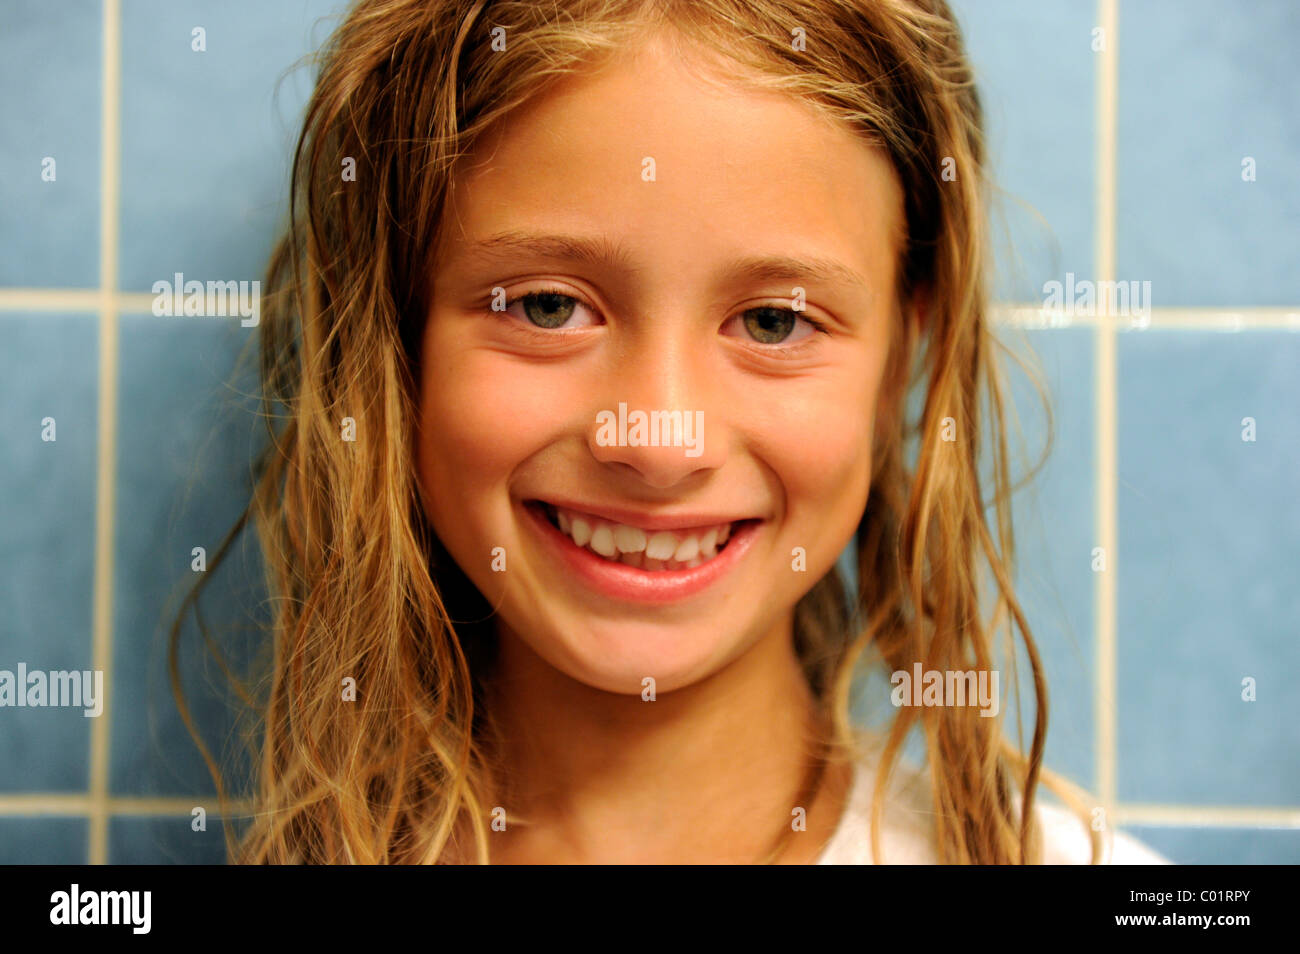 Girl, 8, with unkempt hair Stock Photo